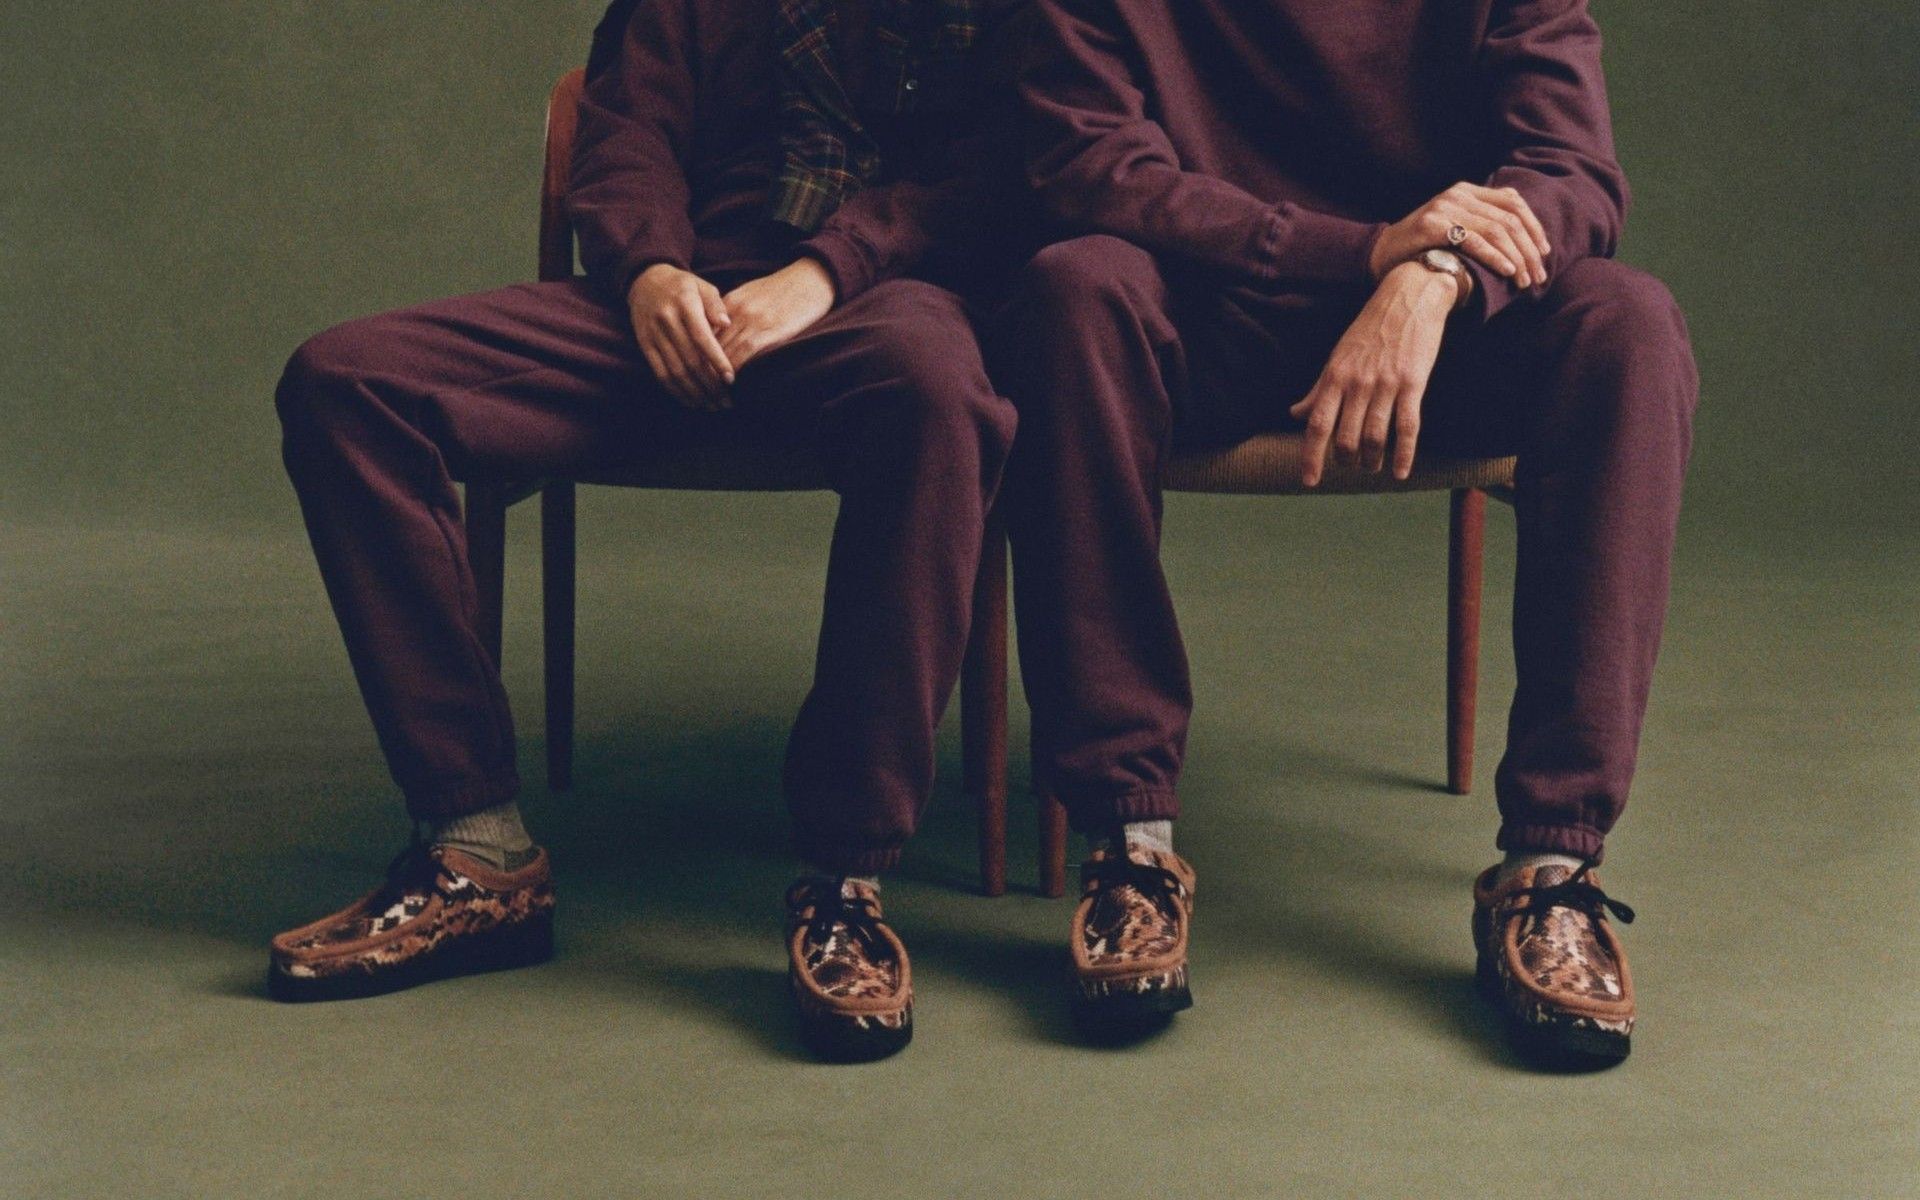 Redaktør Periodisk kam How Wallabees defined the aesthetics of 2021